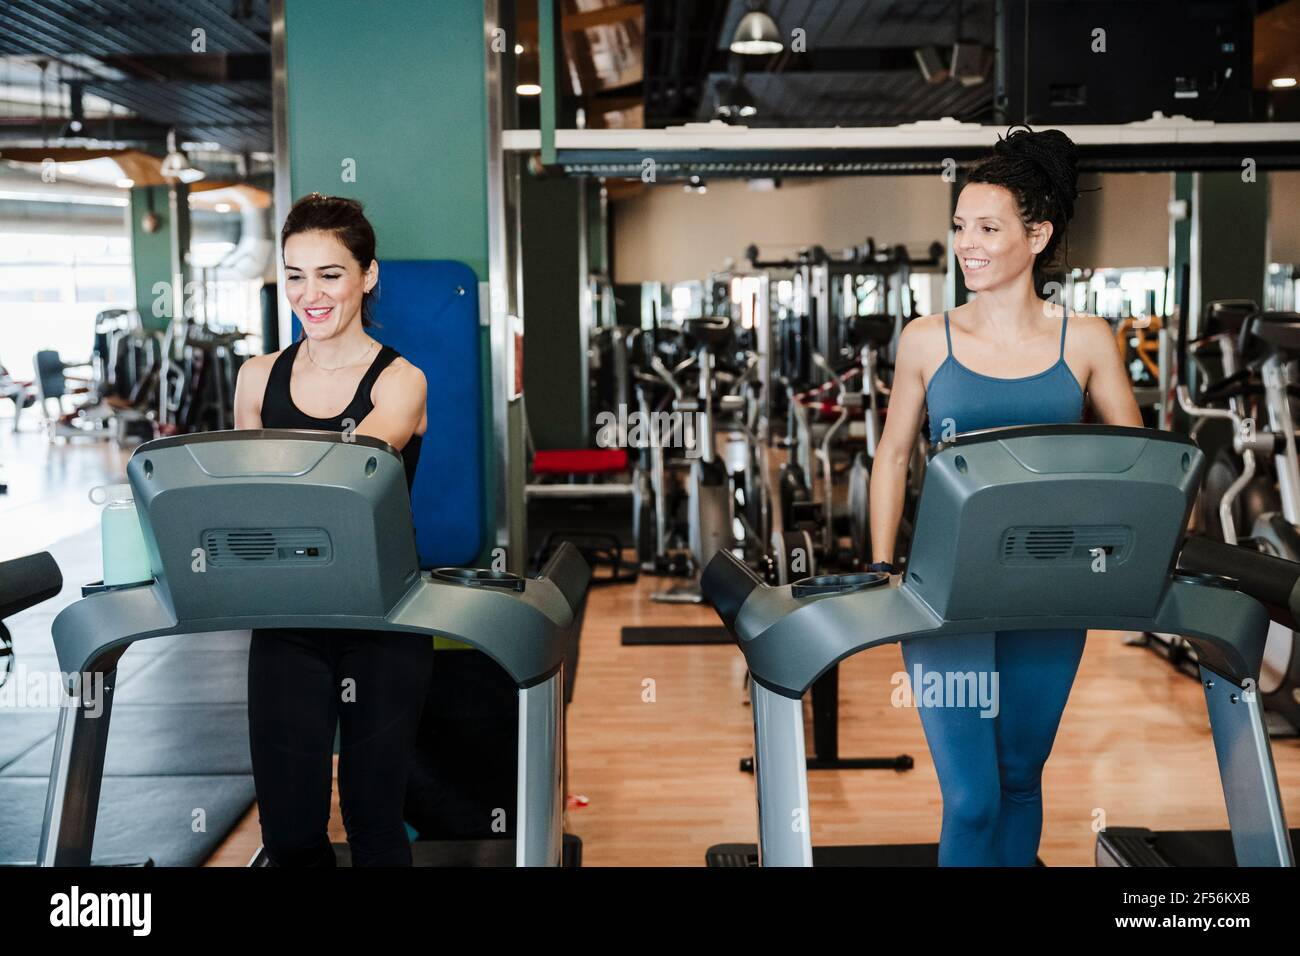 Smiling female athletes exercising on treadmill in health club Stock Photo